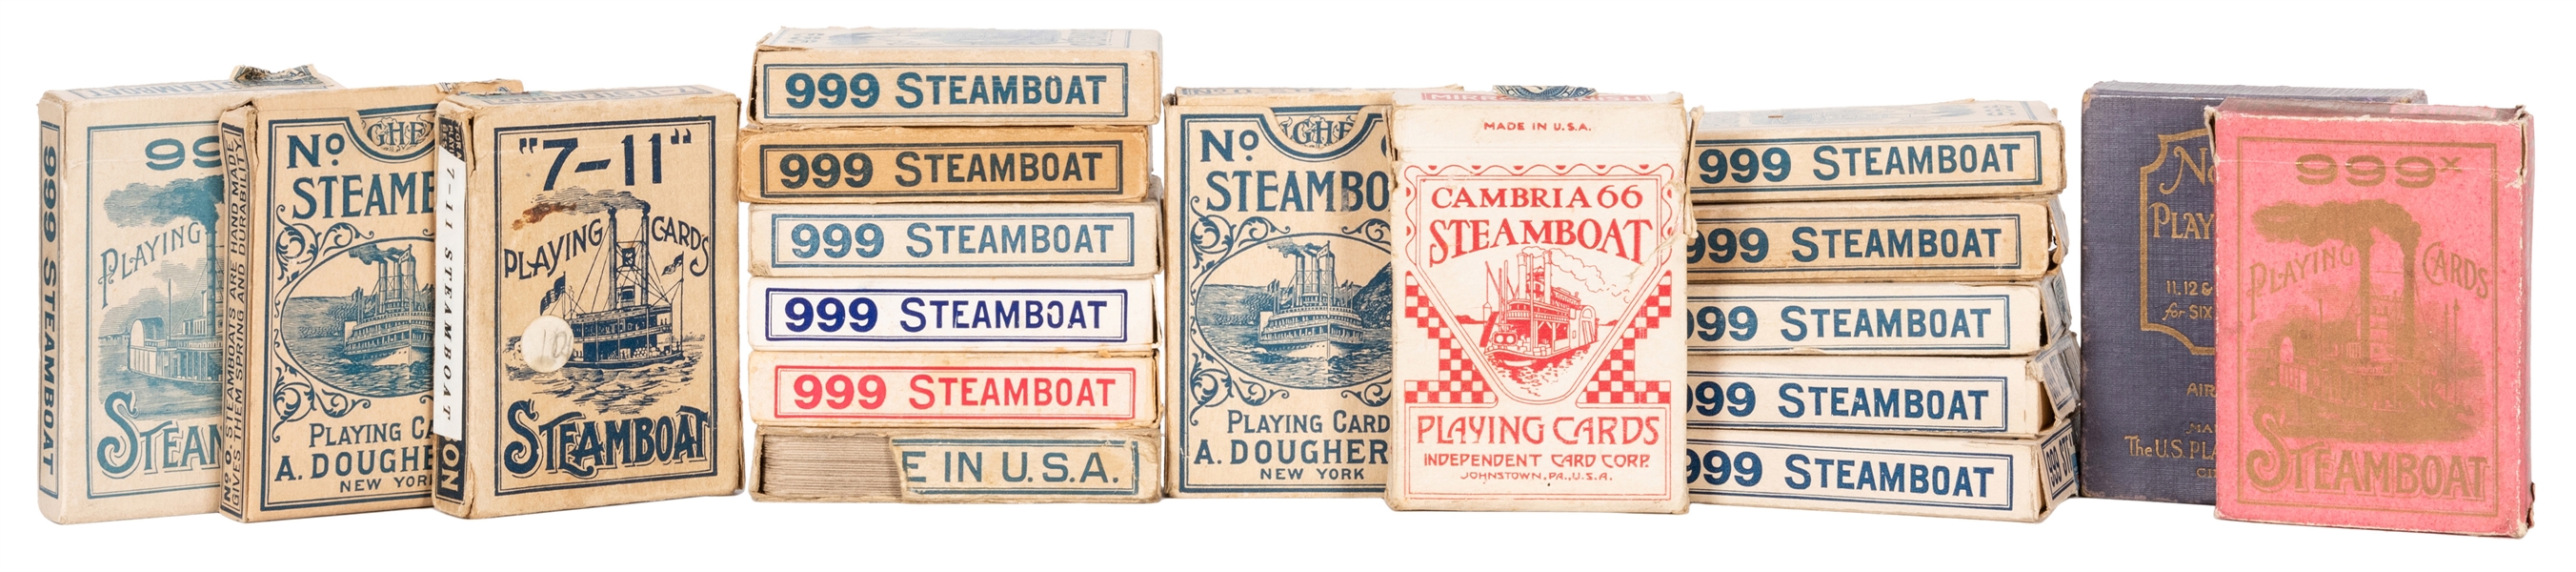  Collection of Steamboat 999 / No. 0 Playing Cards. 